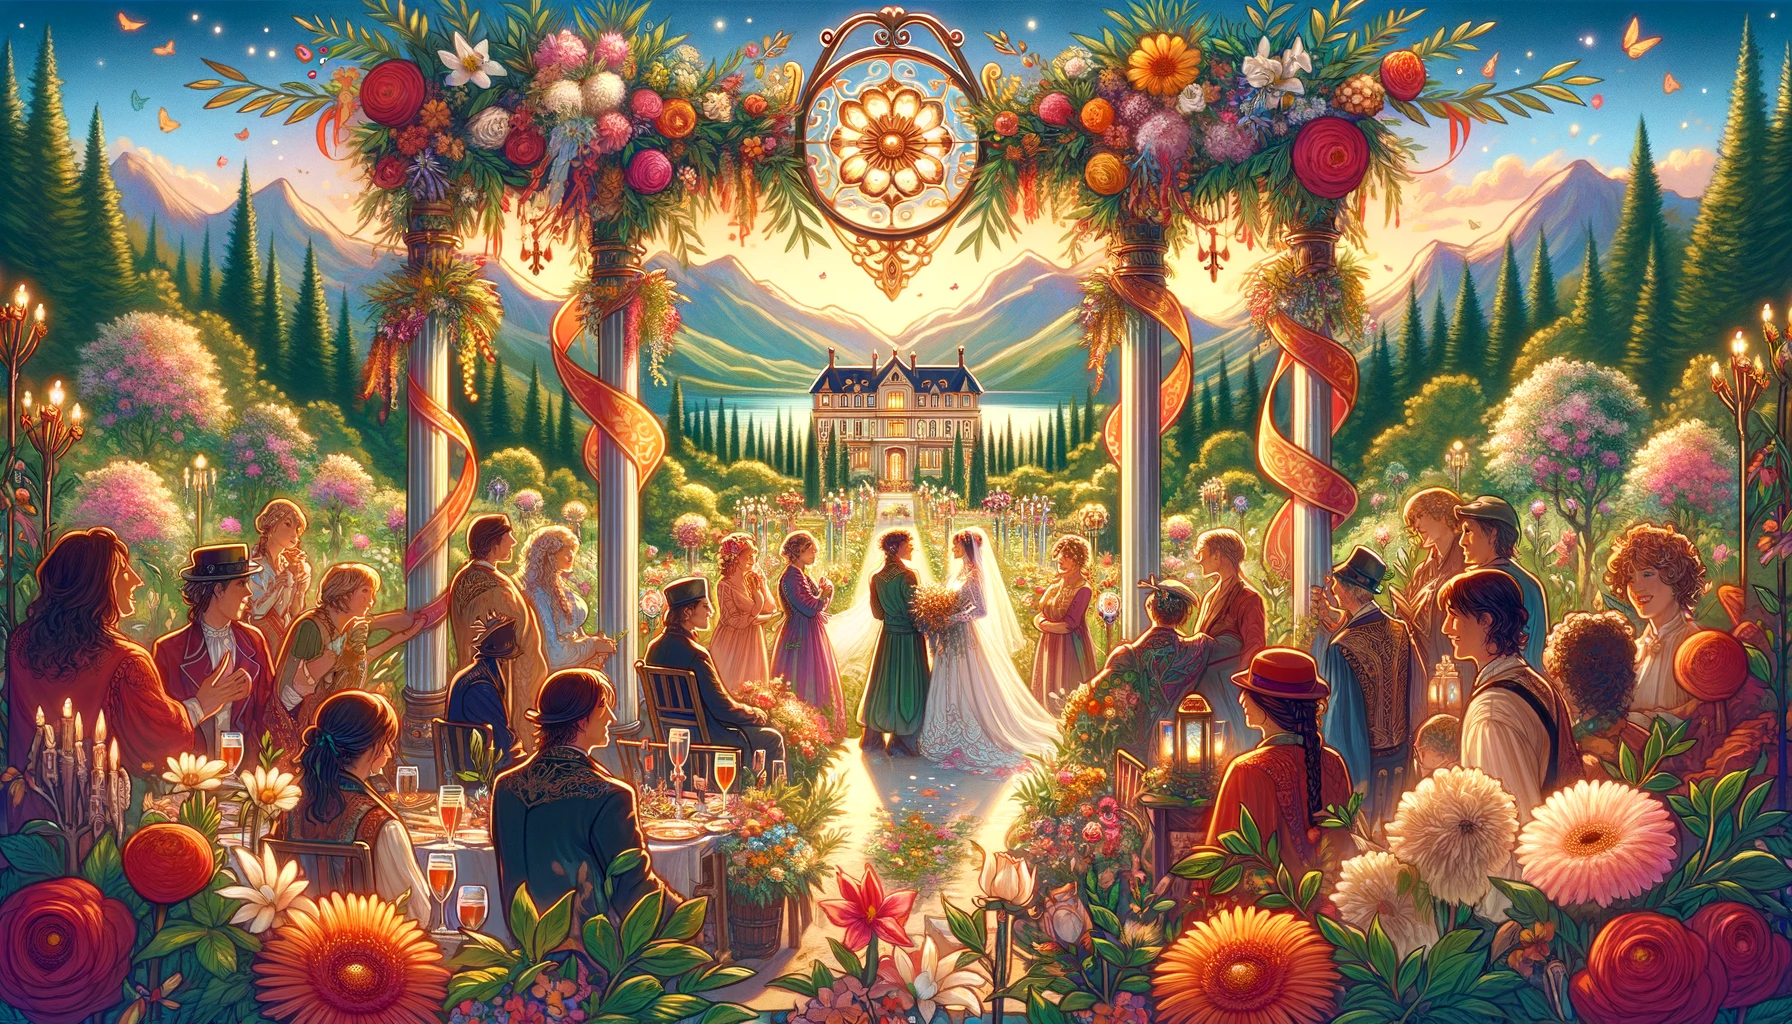 A lively gathering of people in a festive event, symbolizing celebration, harmony, and stability within a community or family setting. The visual depicts the joy and vibrancy of coming together to celebrate and share in the happiness of the occasion. Set against a backdrop that emphasizes growth, prosperity, and the foundation of lasting relationships, the scene evokes a sense of unity and shared accomplishment.